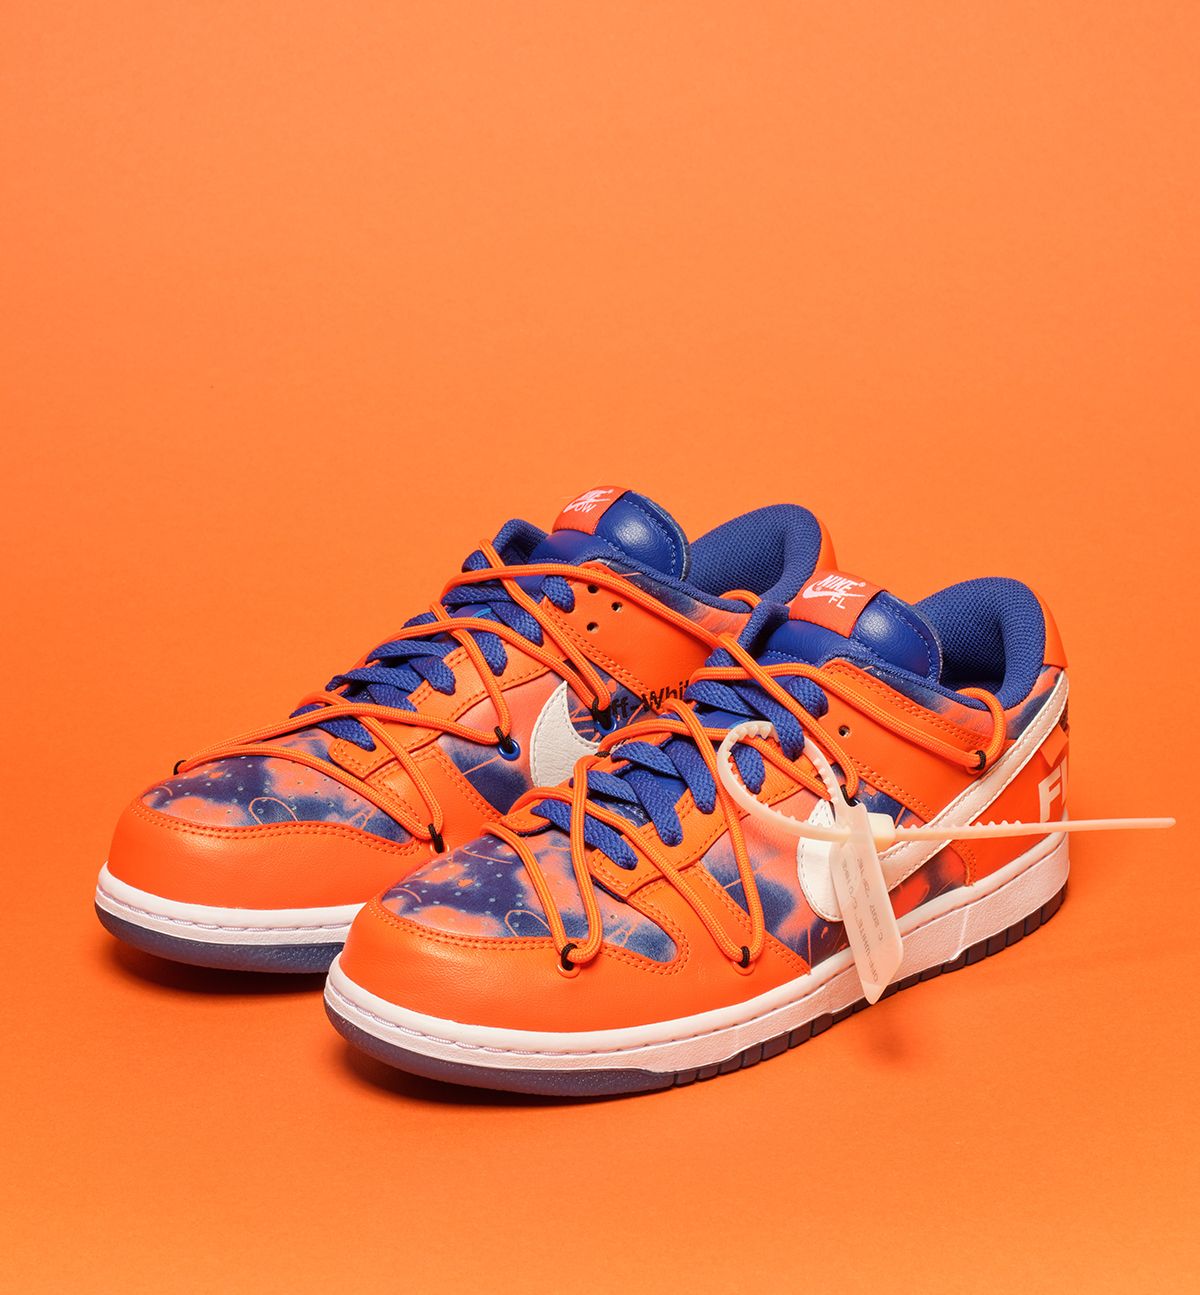 The Virgil Abloh x Futura Laboratories Nike Dunk Low Auctioned for